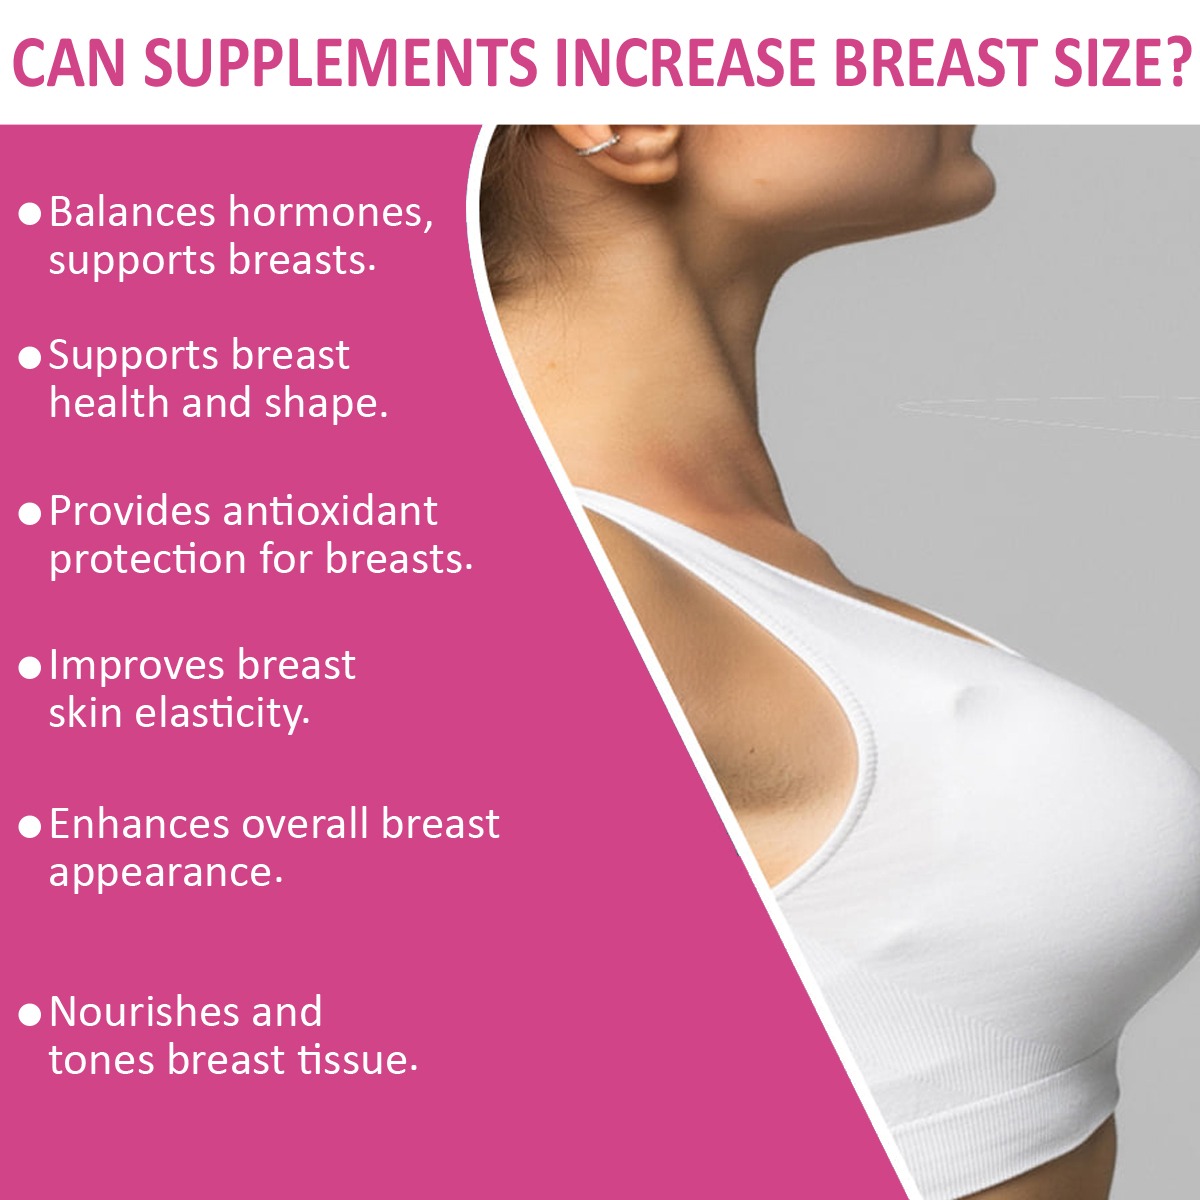 Different Ways to Increase Breast Size